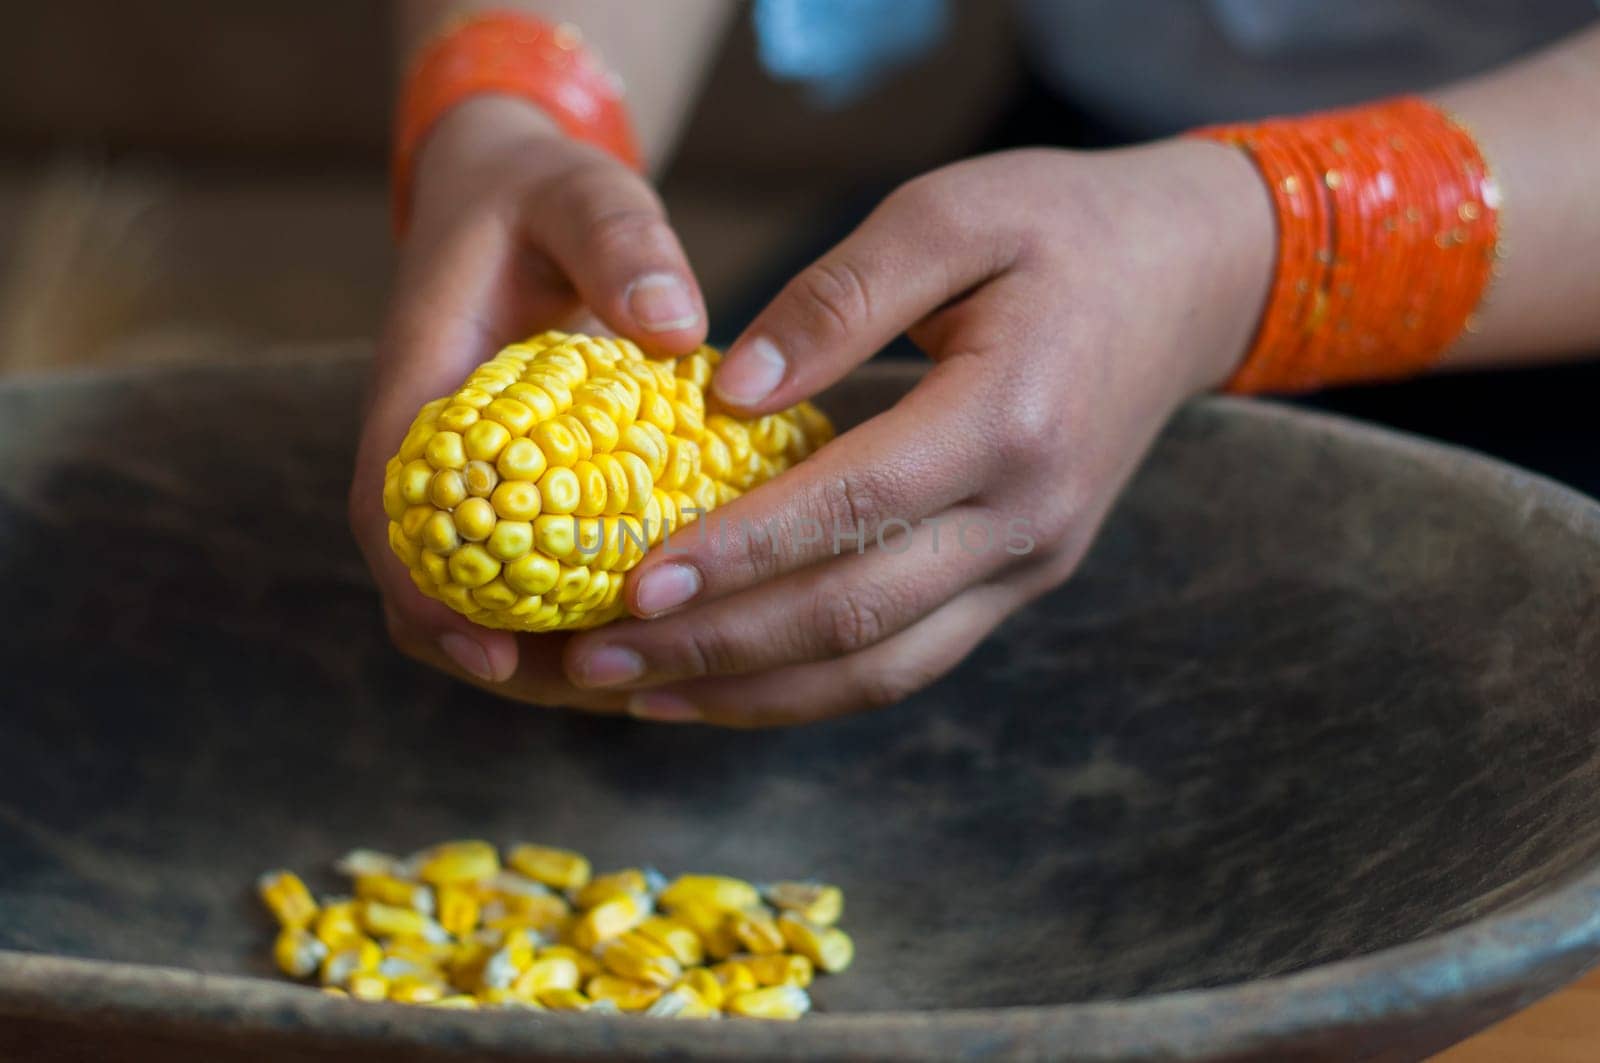 hands of a country woman grouping grains of yellow corn or sweet corn for cooking. High quality photo